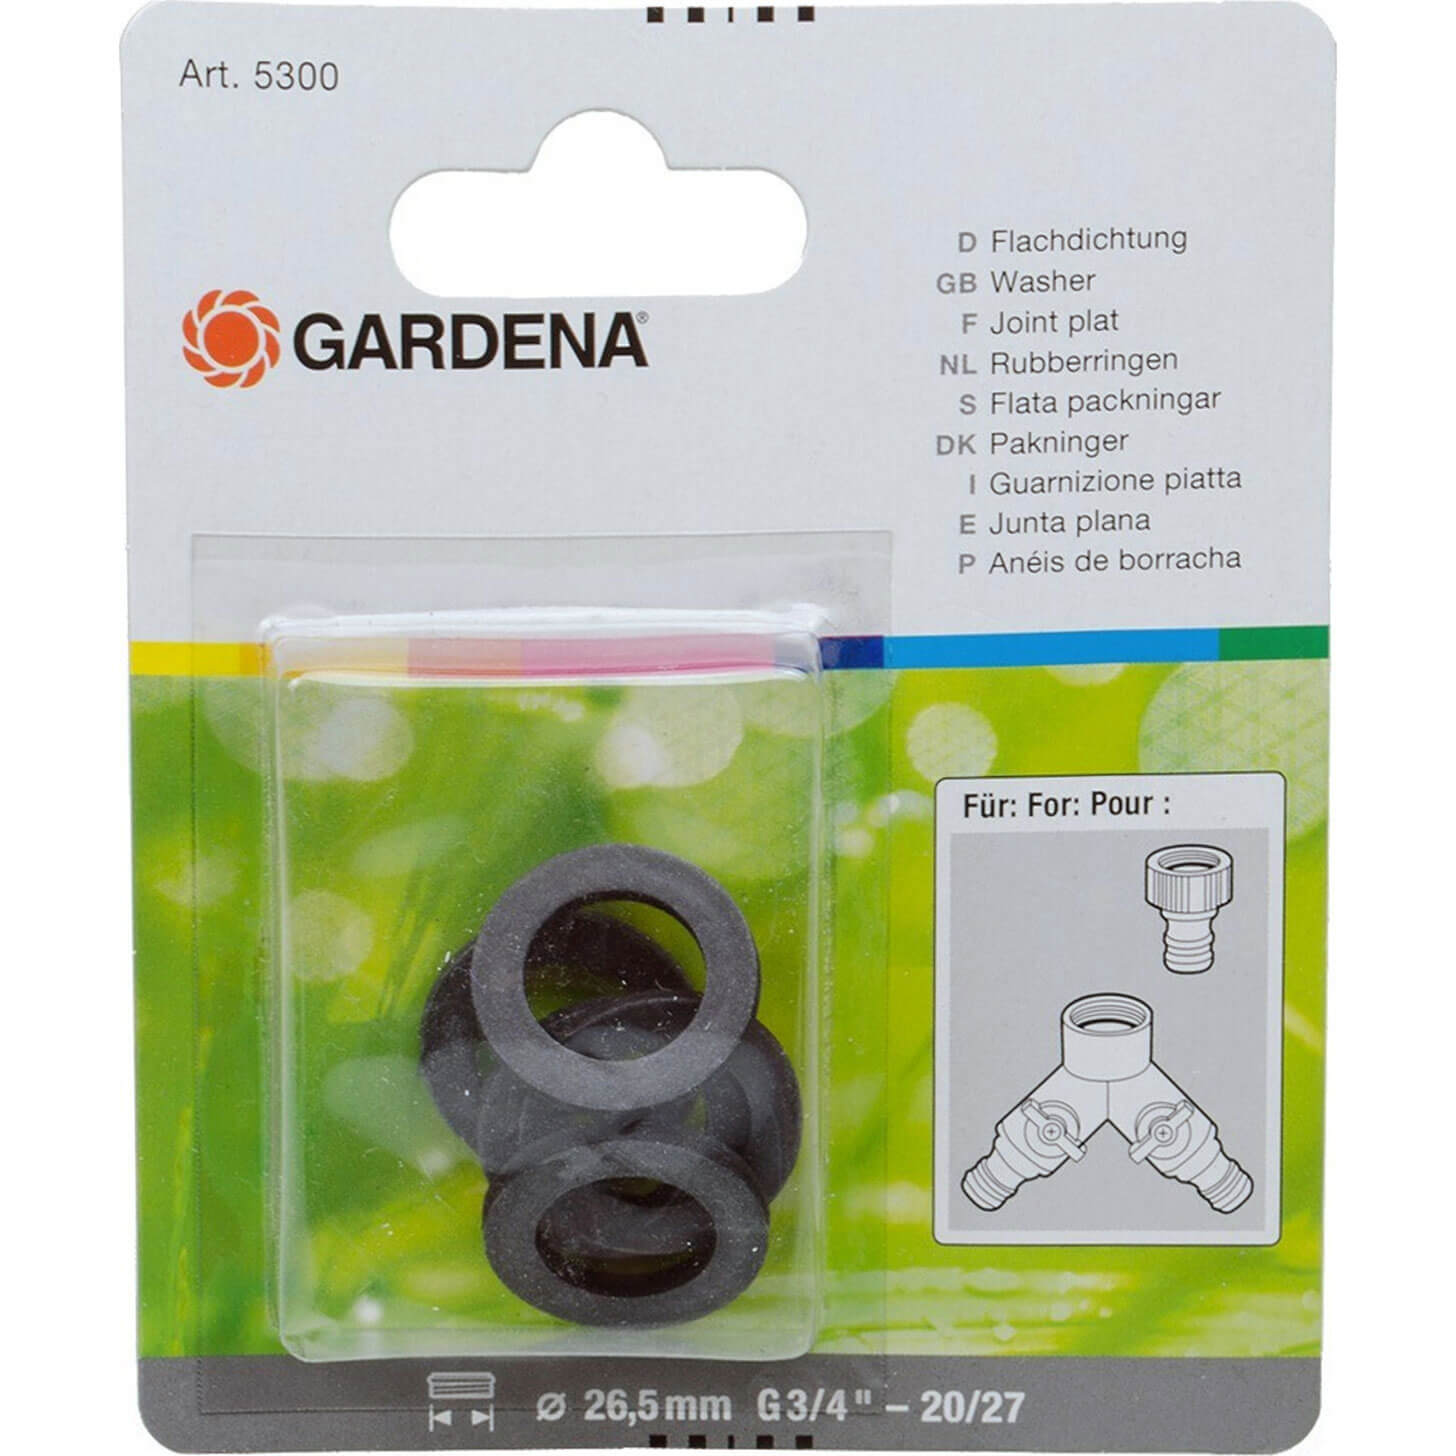 Photos - Other for Irrigation GARDENA ORIGINAL Replacement Tap Washers 5300-20 